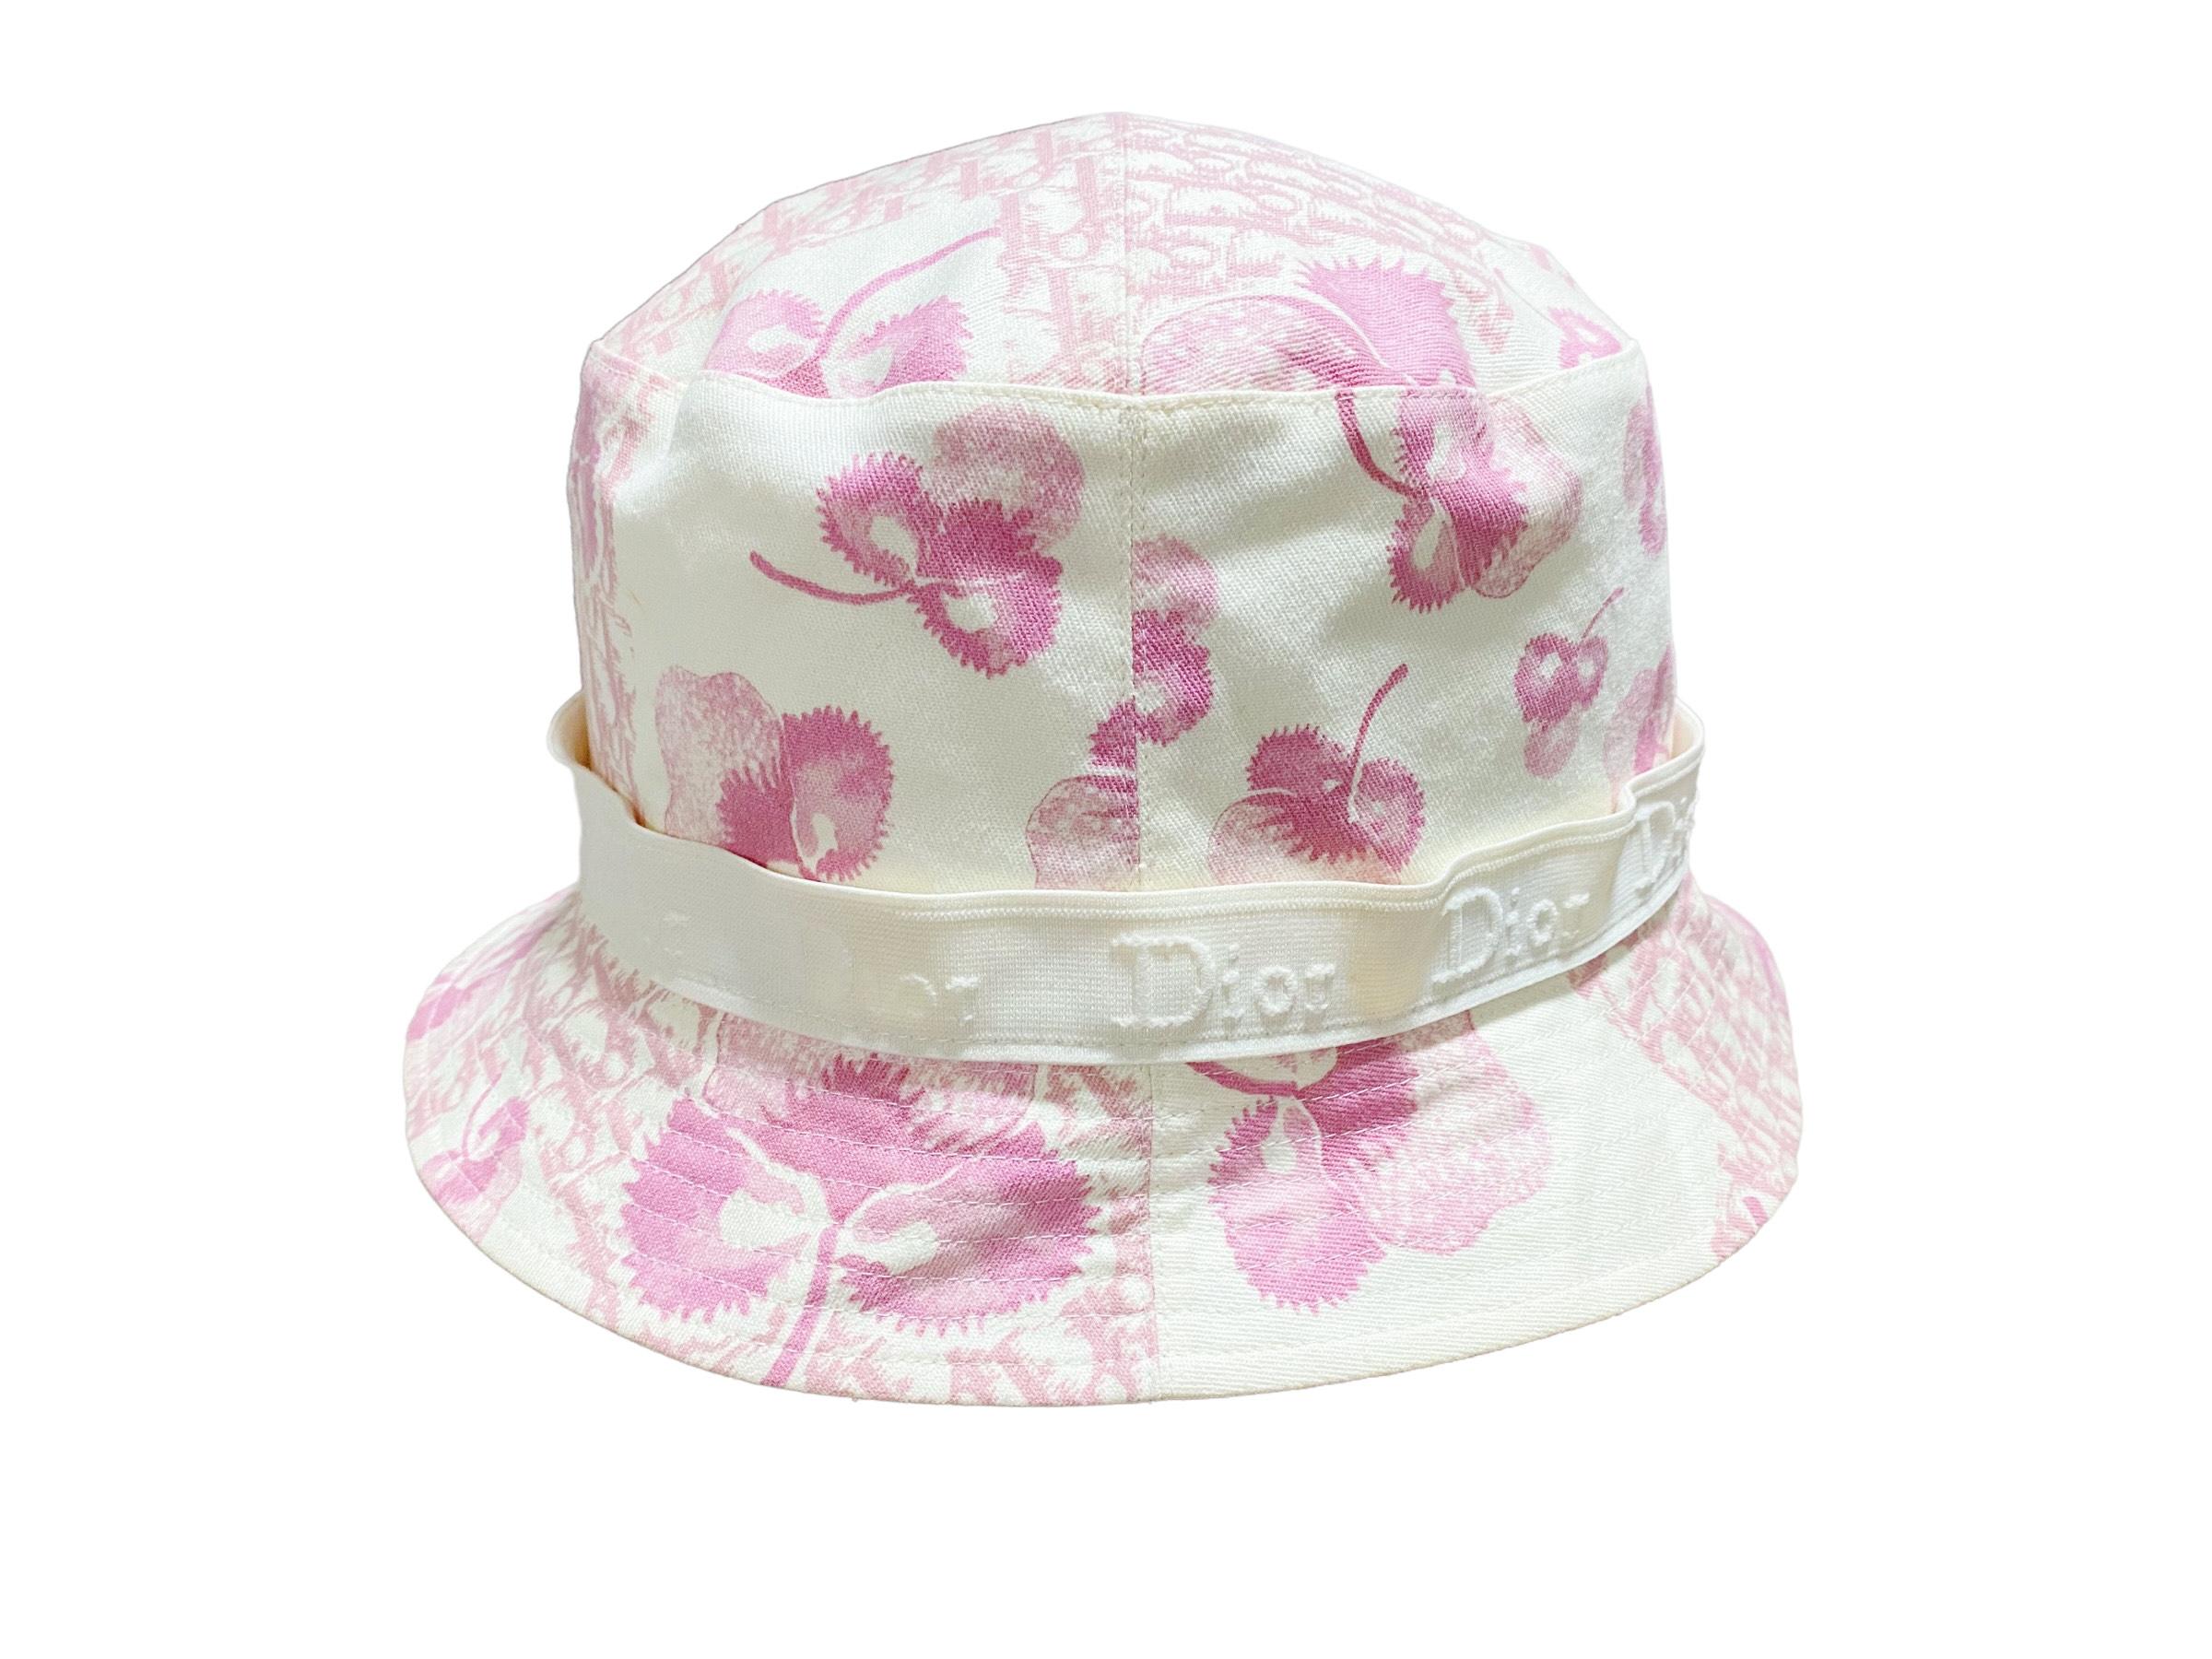 Christian Dior - Diorissimo Resort 2005 Logo Flowers Bucket Hat In Excellent Condition For Sale In Iba, PH